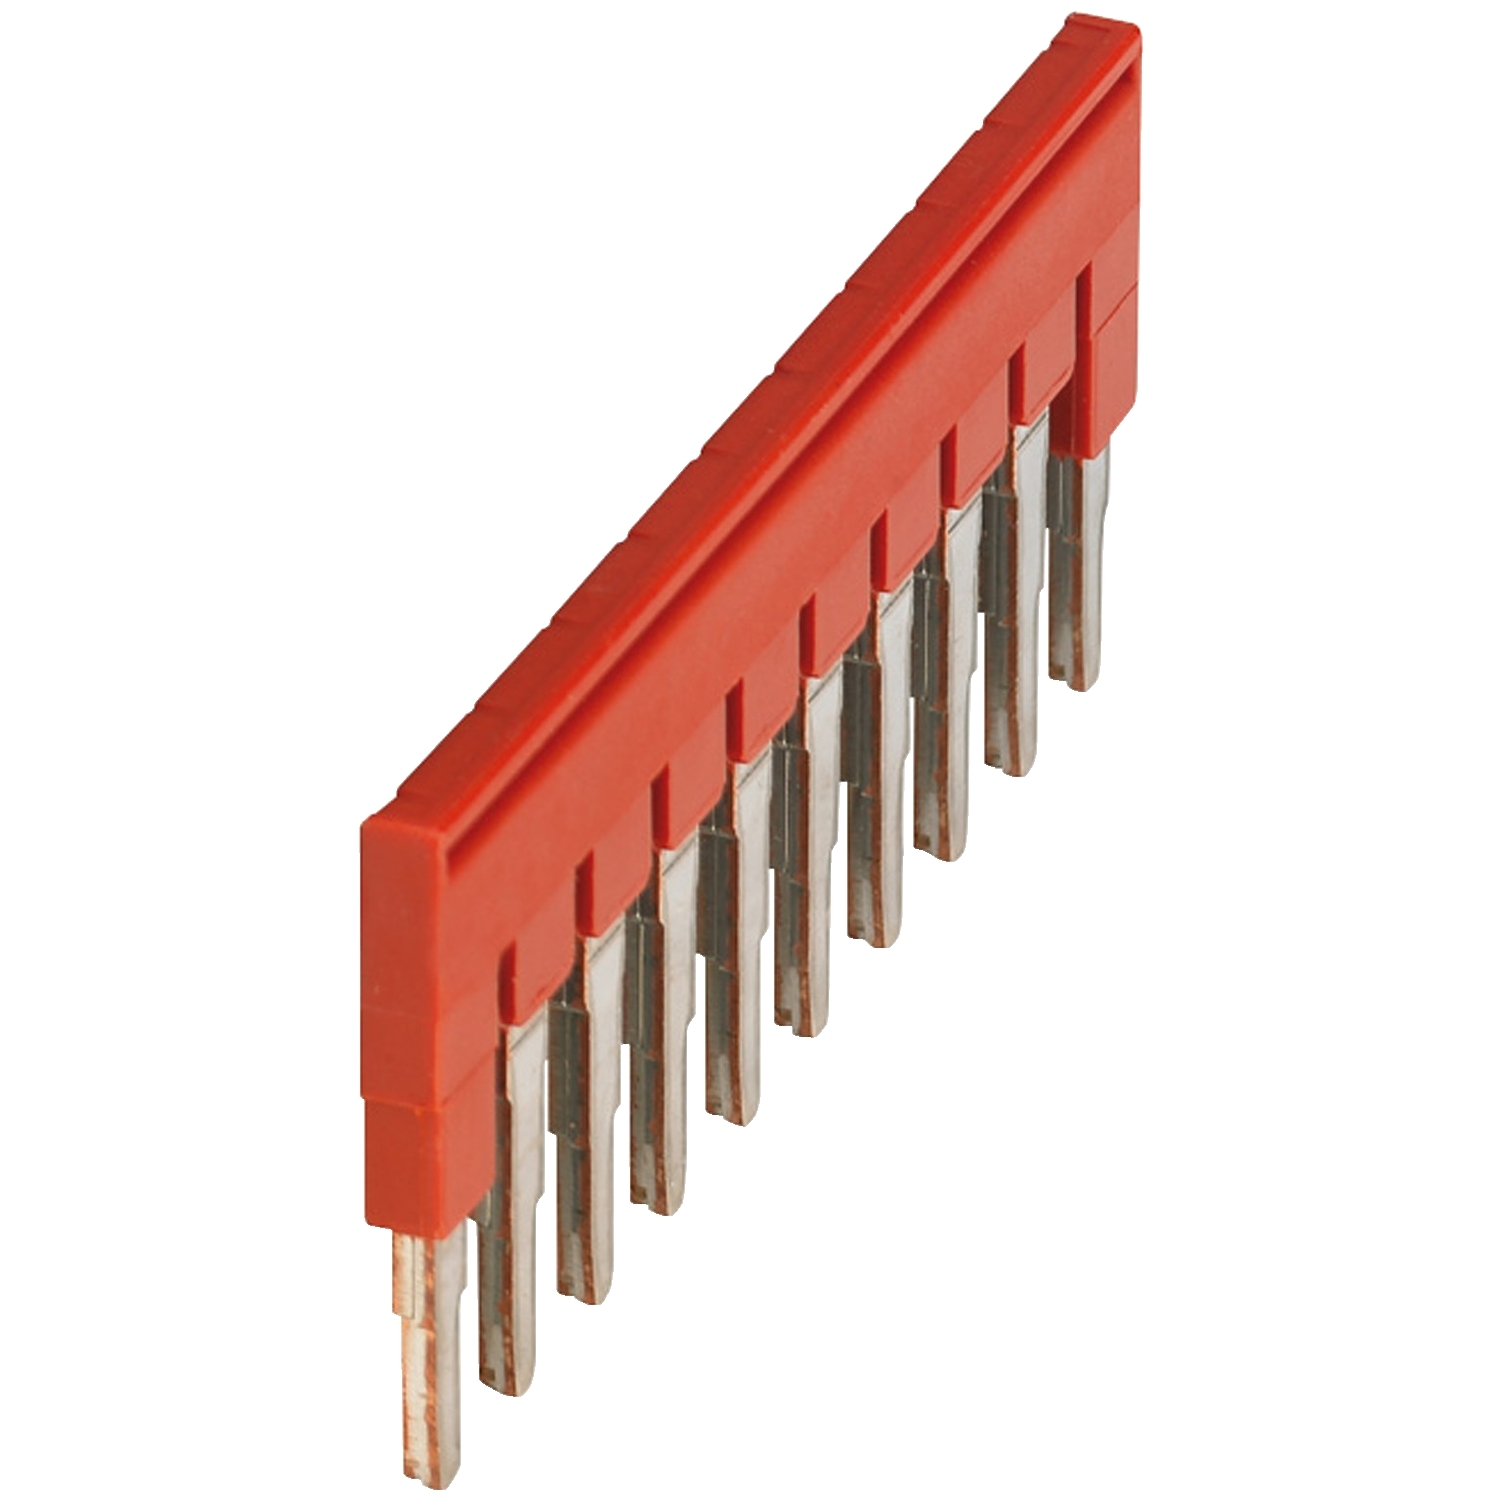 Plug-in bridge, Linergy TR, 10 points, for 4mm² terminal blocks, red, 10 way, set of 10